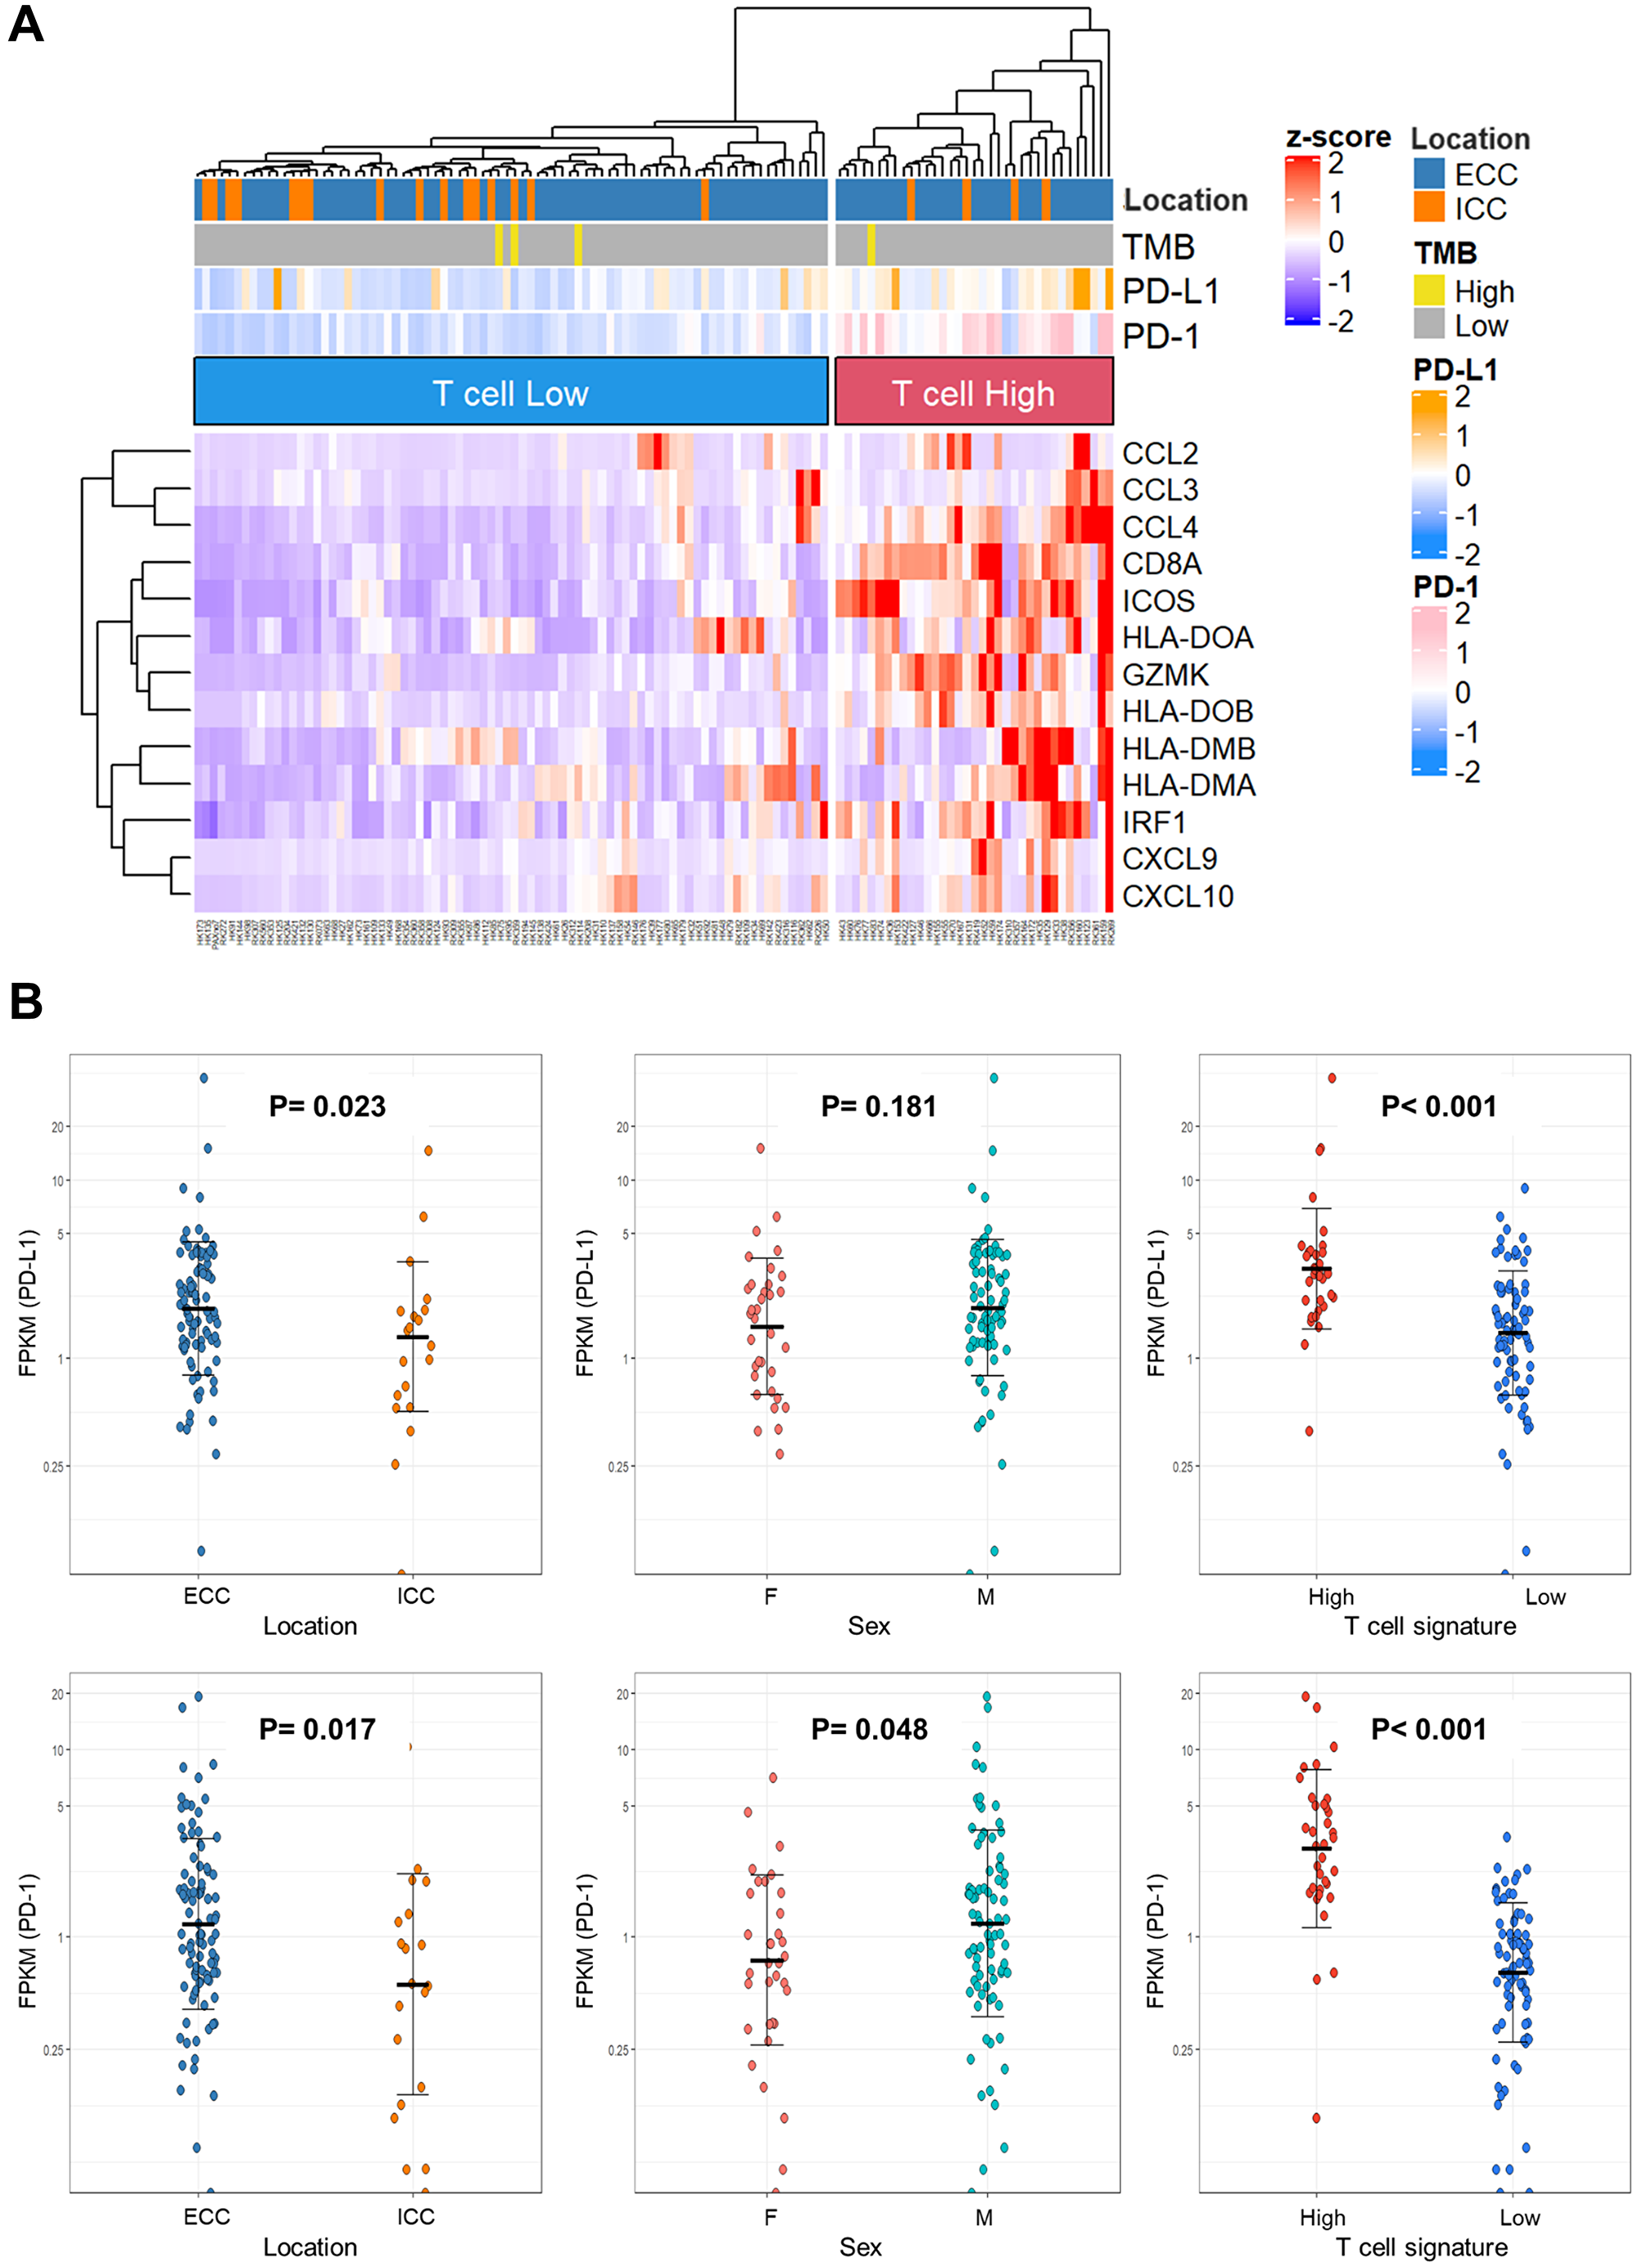 Figure 3: Immune-signature analysis of biliary tract cancer by RNA sequencing.